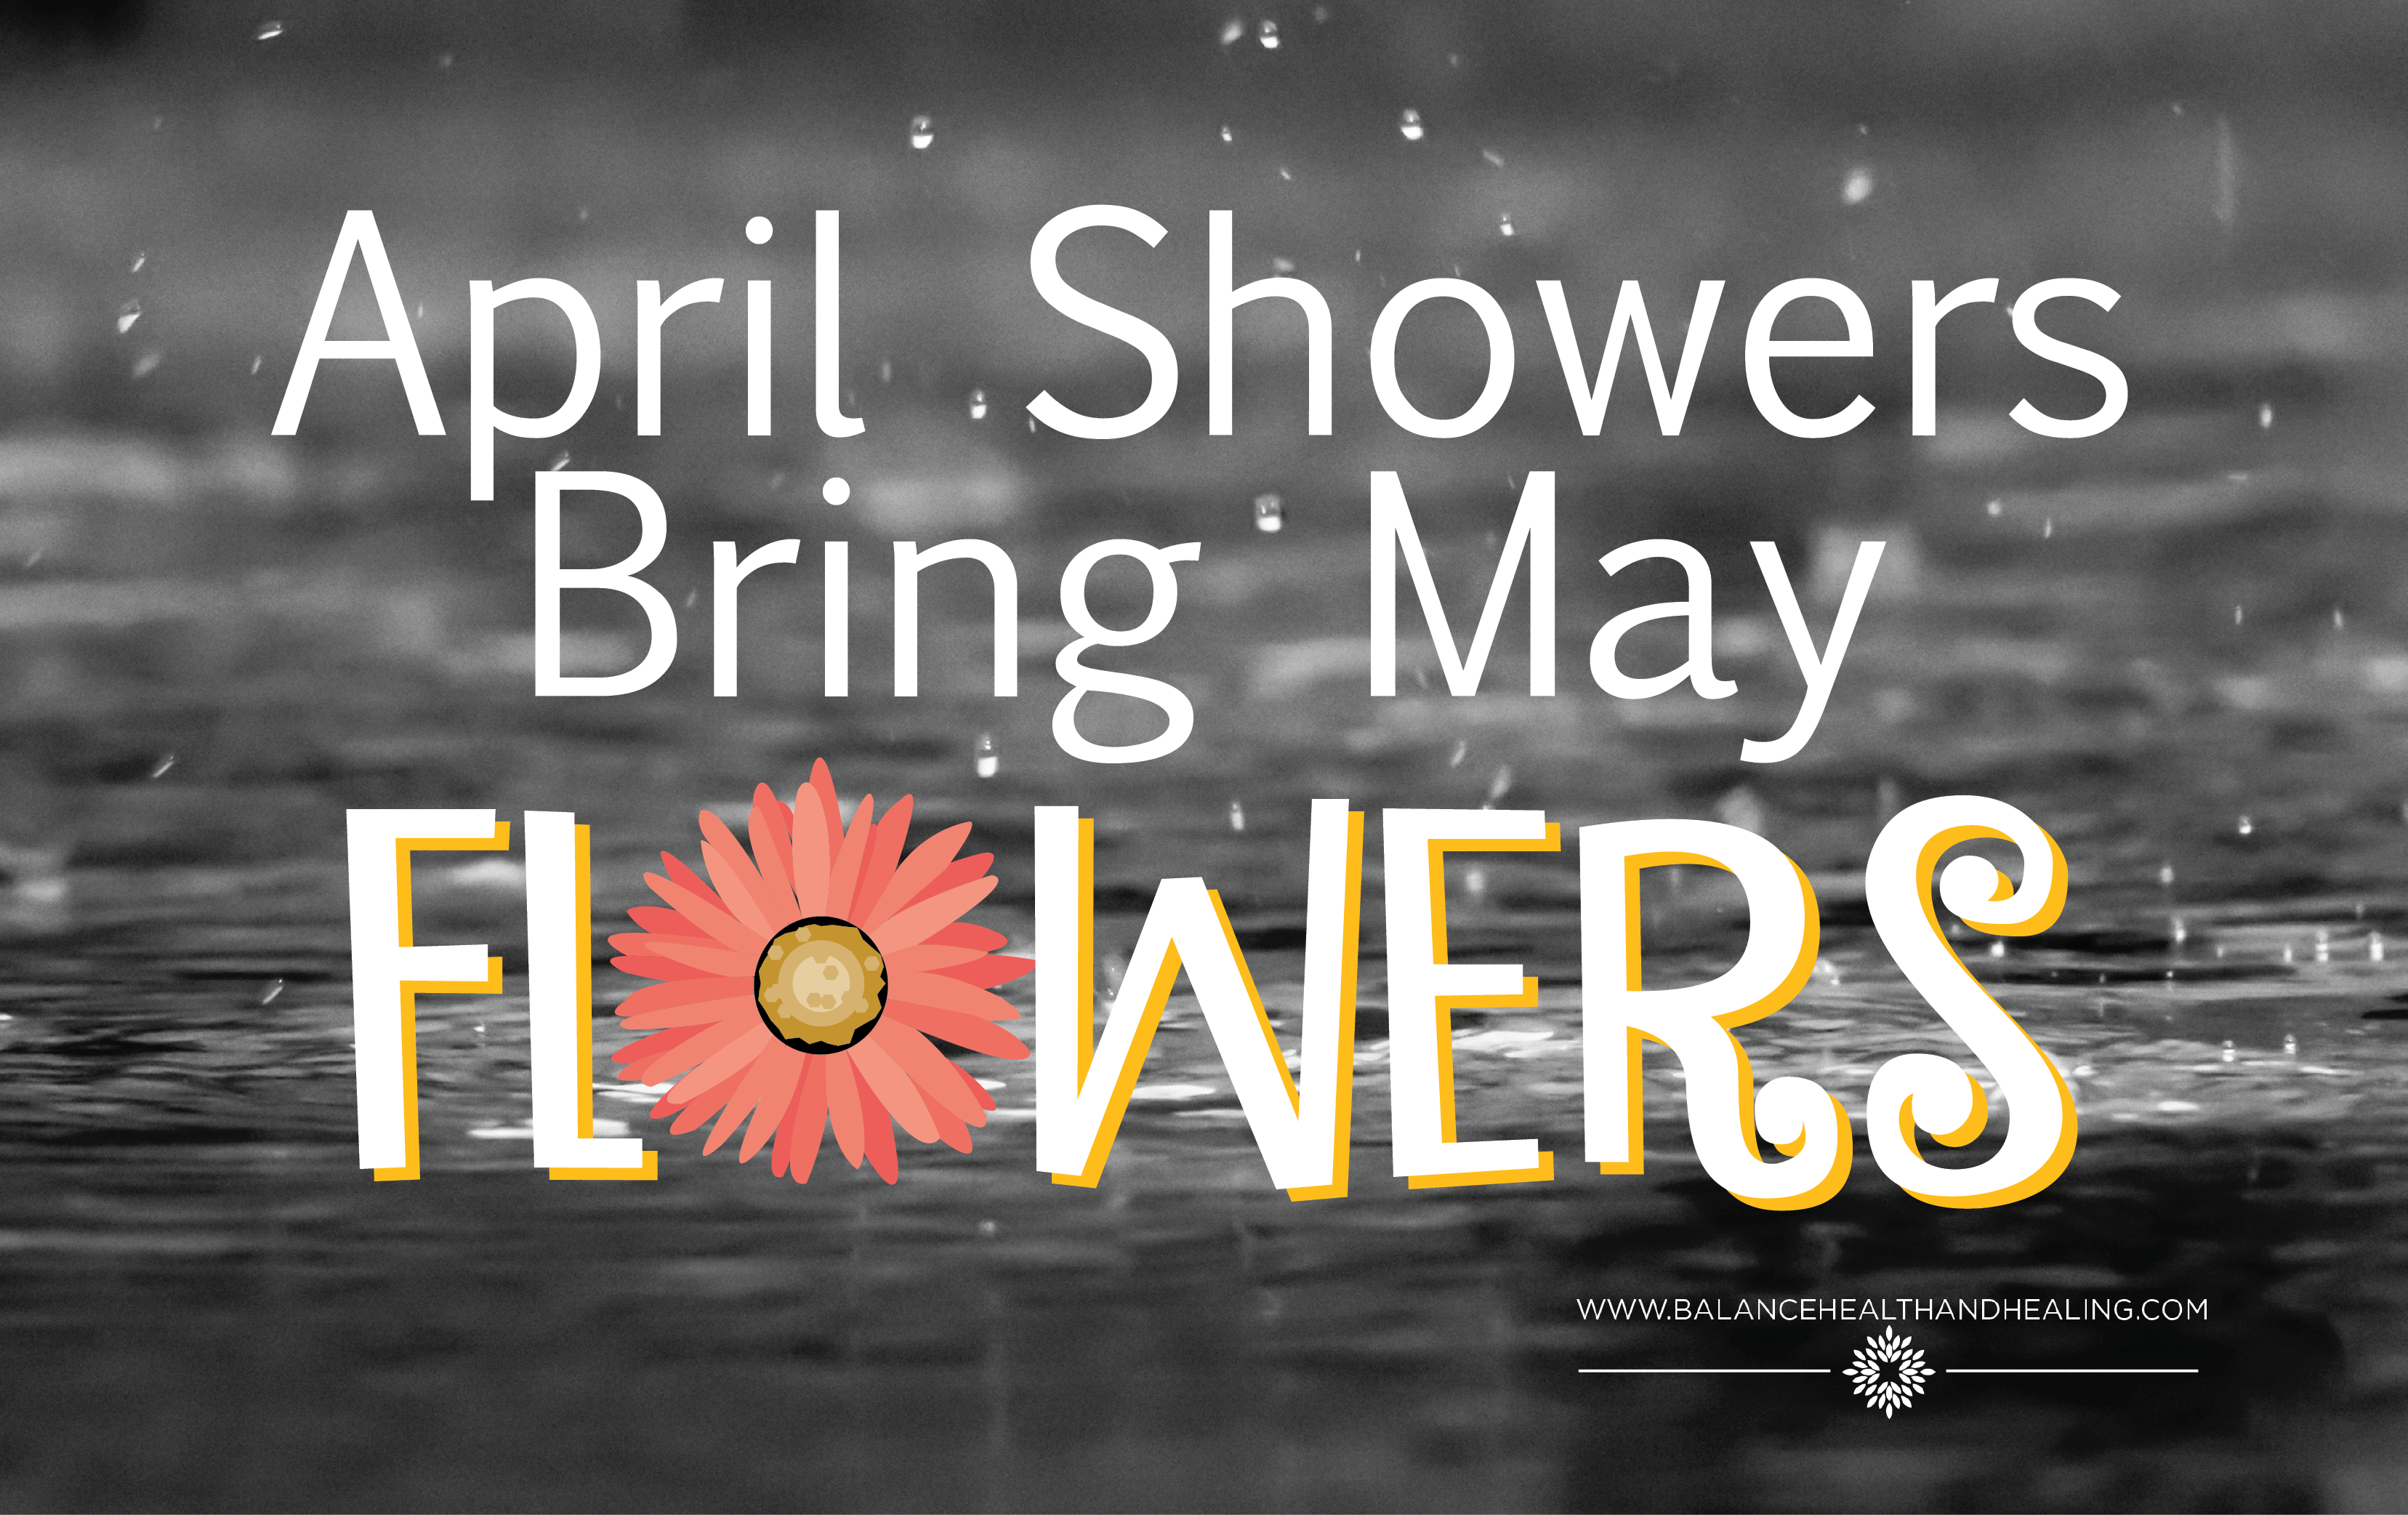 April Showers Bring May Flowers Health & Healing